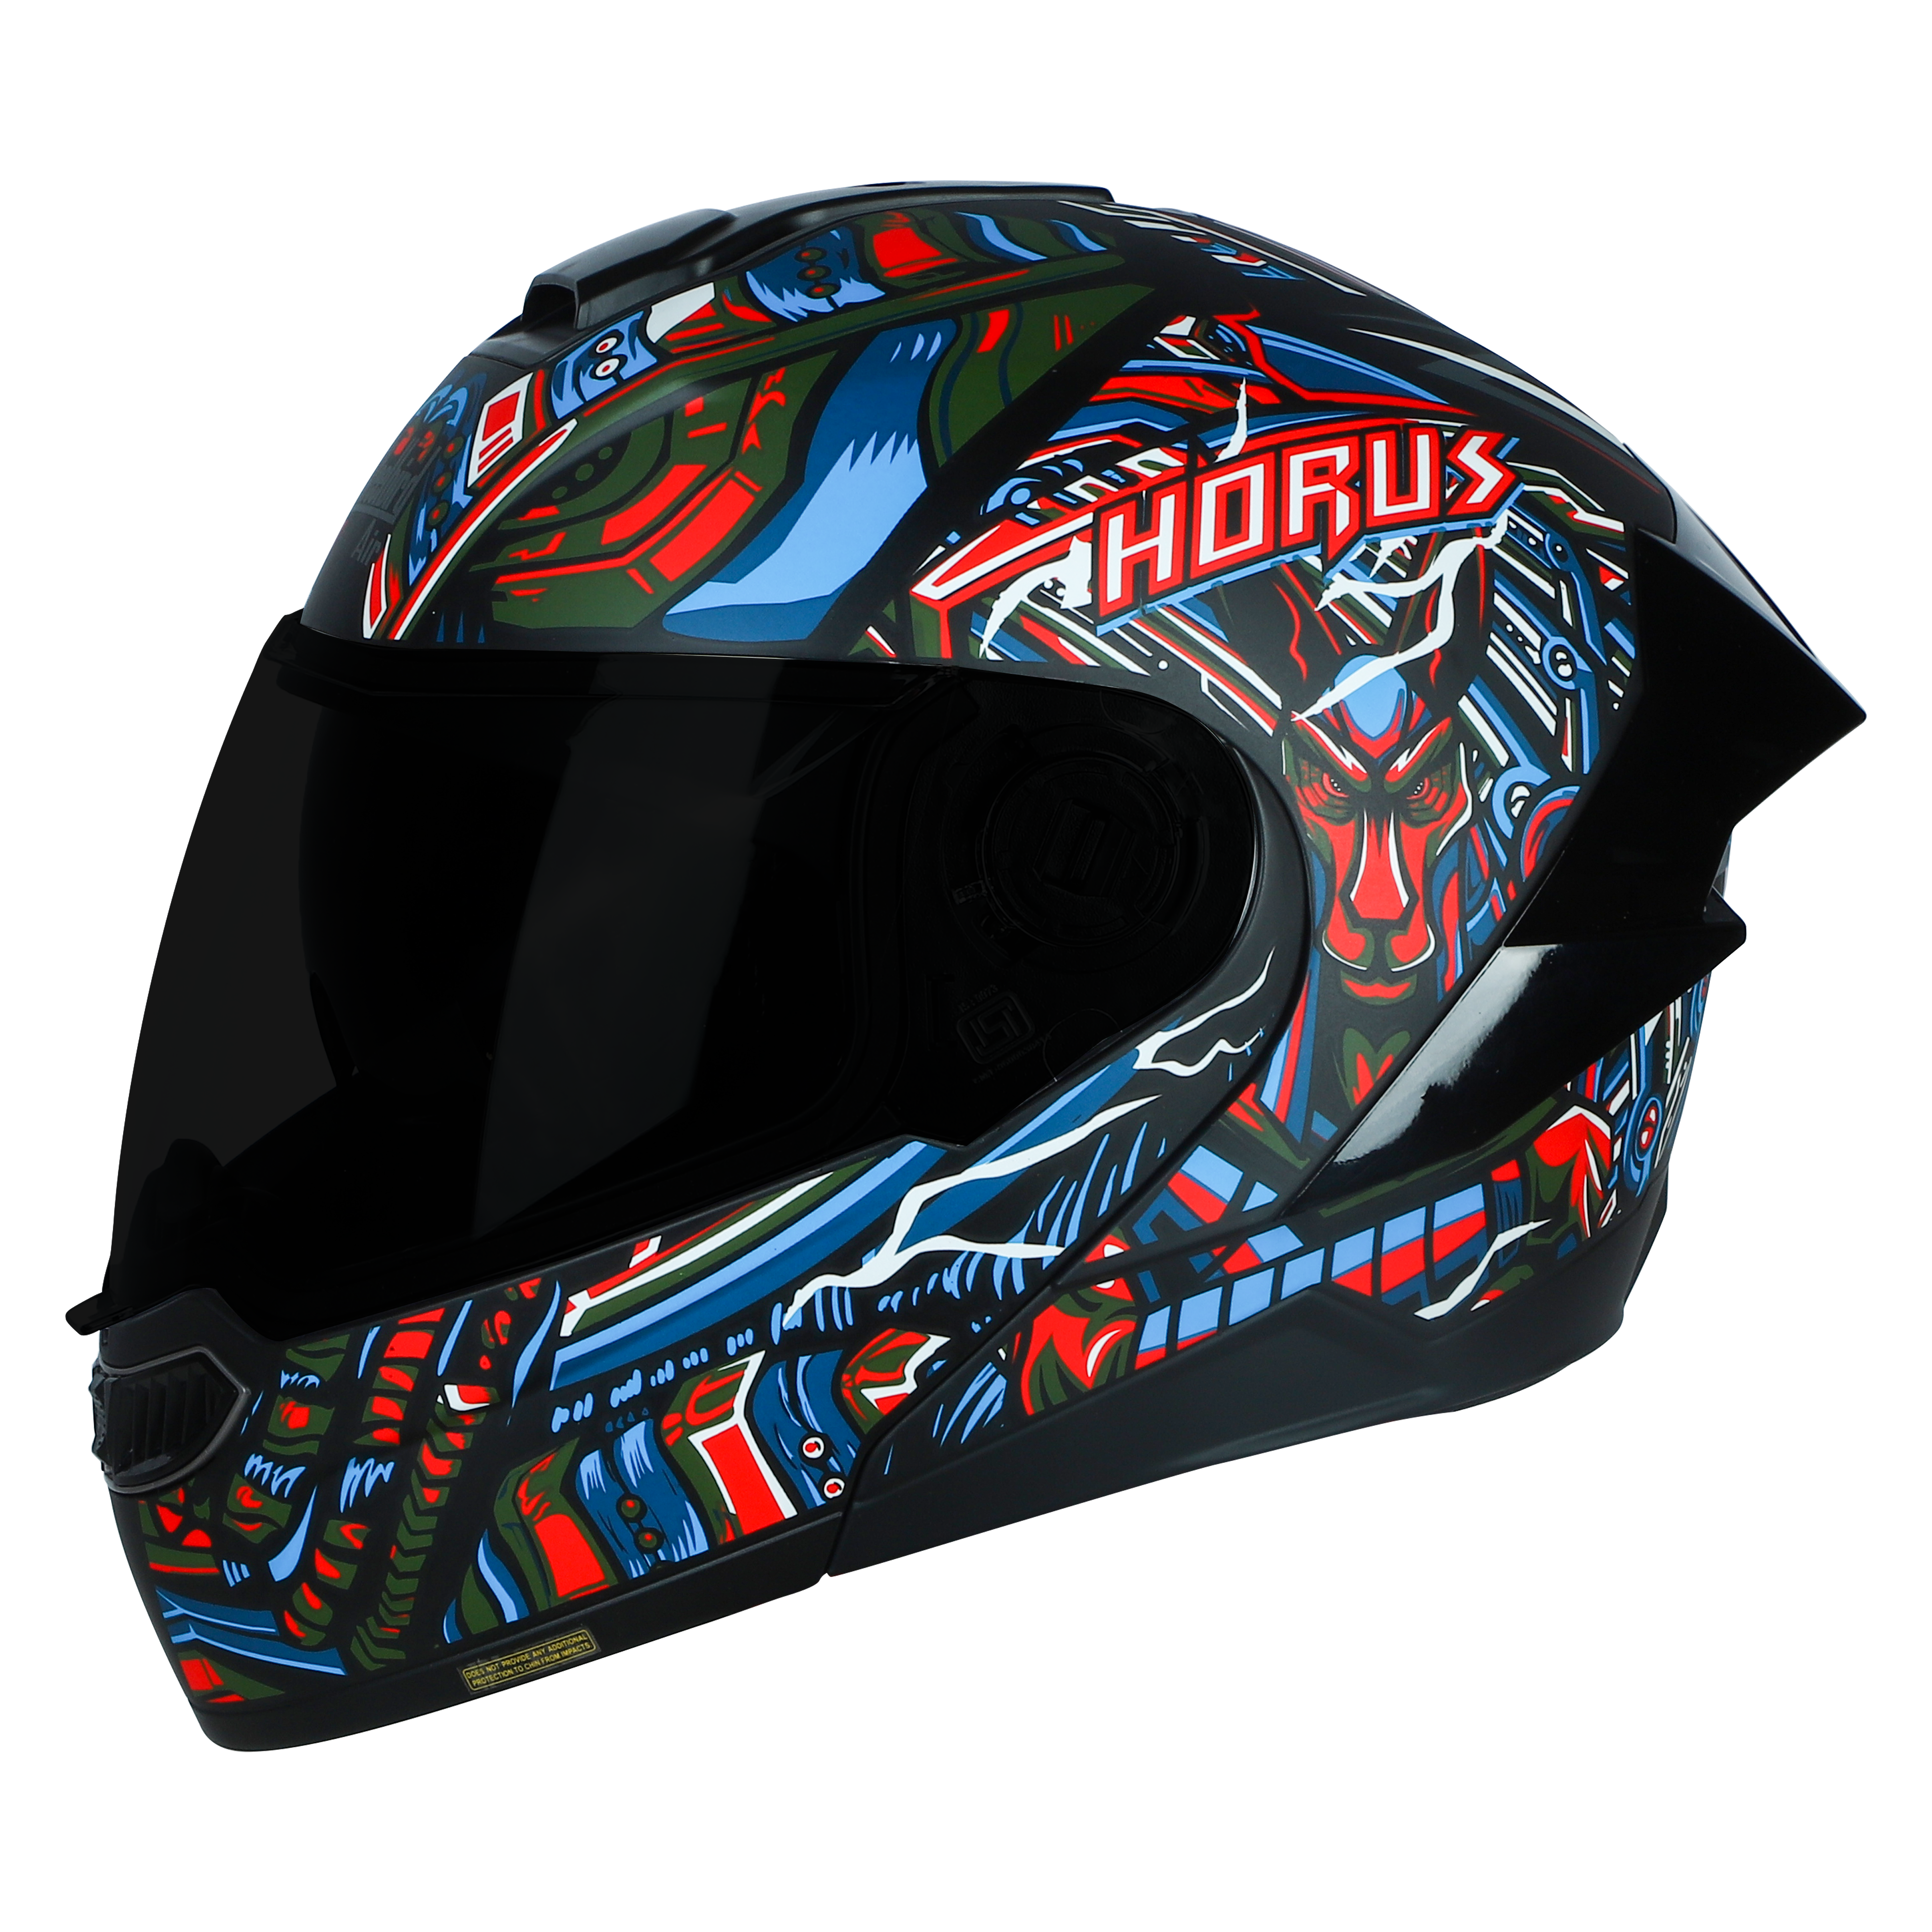 SBA-8 ISS HORUS GLOSSY BLACK WITH RED